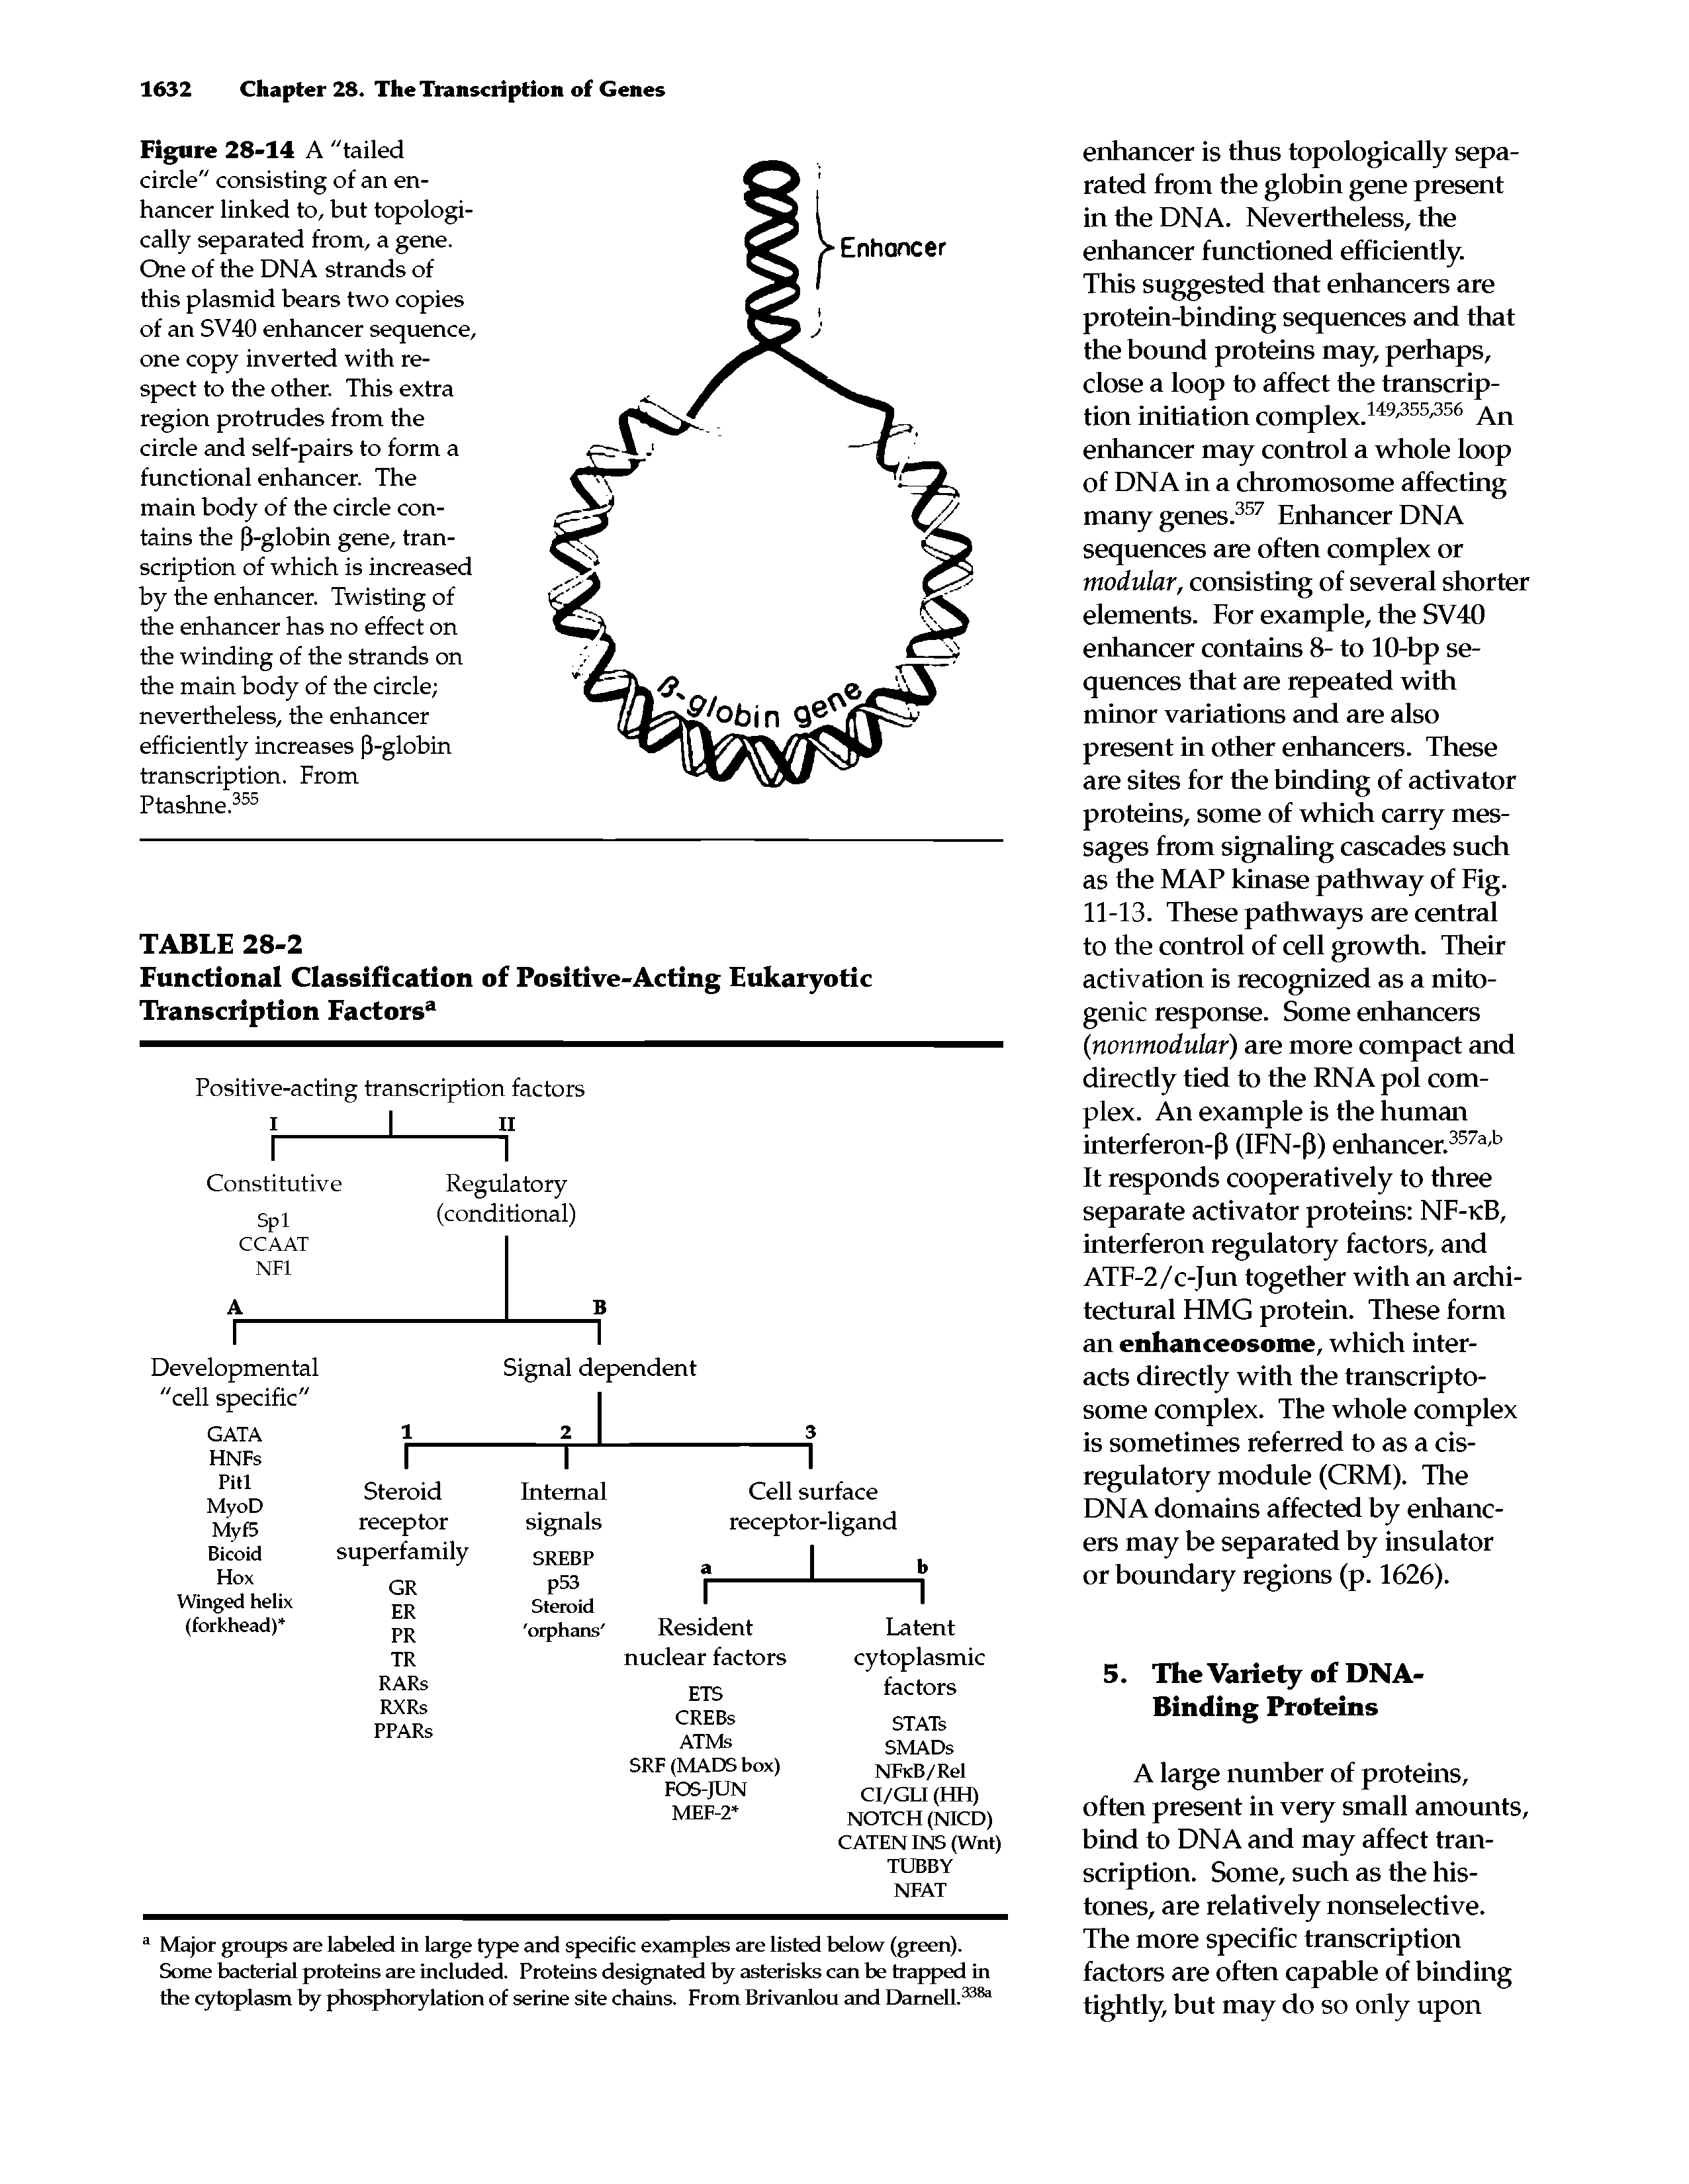 Figure 28-14 A "tailed circle" consisting of an enhancer linked to, but topologically separated from, a gene. One of the DNA strands of this plasmid bears two copies of an SV40 enhancer sequence, one copy inverted with respect to the other. This extra region protrudes from the circle and self-pairs to form a functional enhancer. The main body of the circle contains the p-globin gene, transcription of which is increased by the enhancer. Twisting of the enhancer has no effect on the winding of the strands on the main body of the circle nevertheless, the enhancer efficiently increases P-globin transcription. From Ptashne.355...